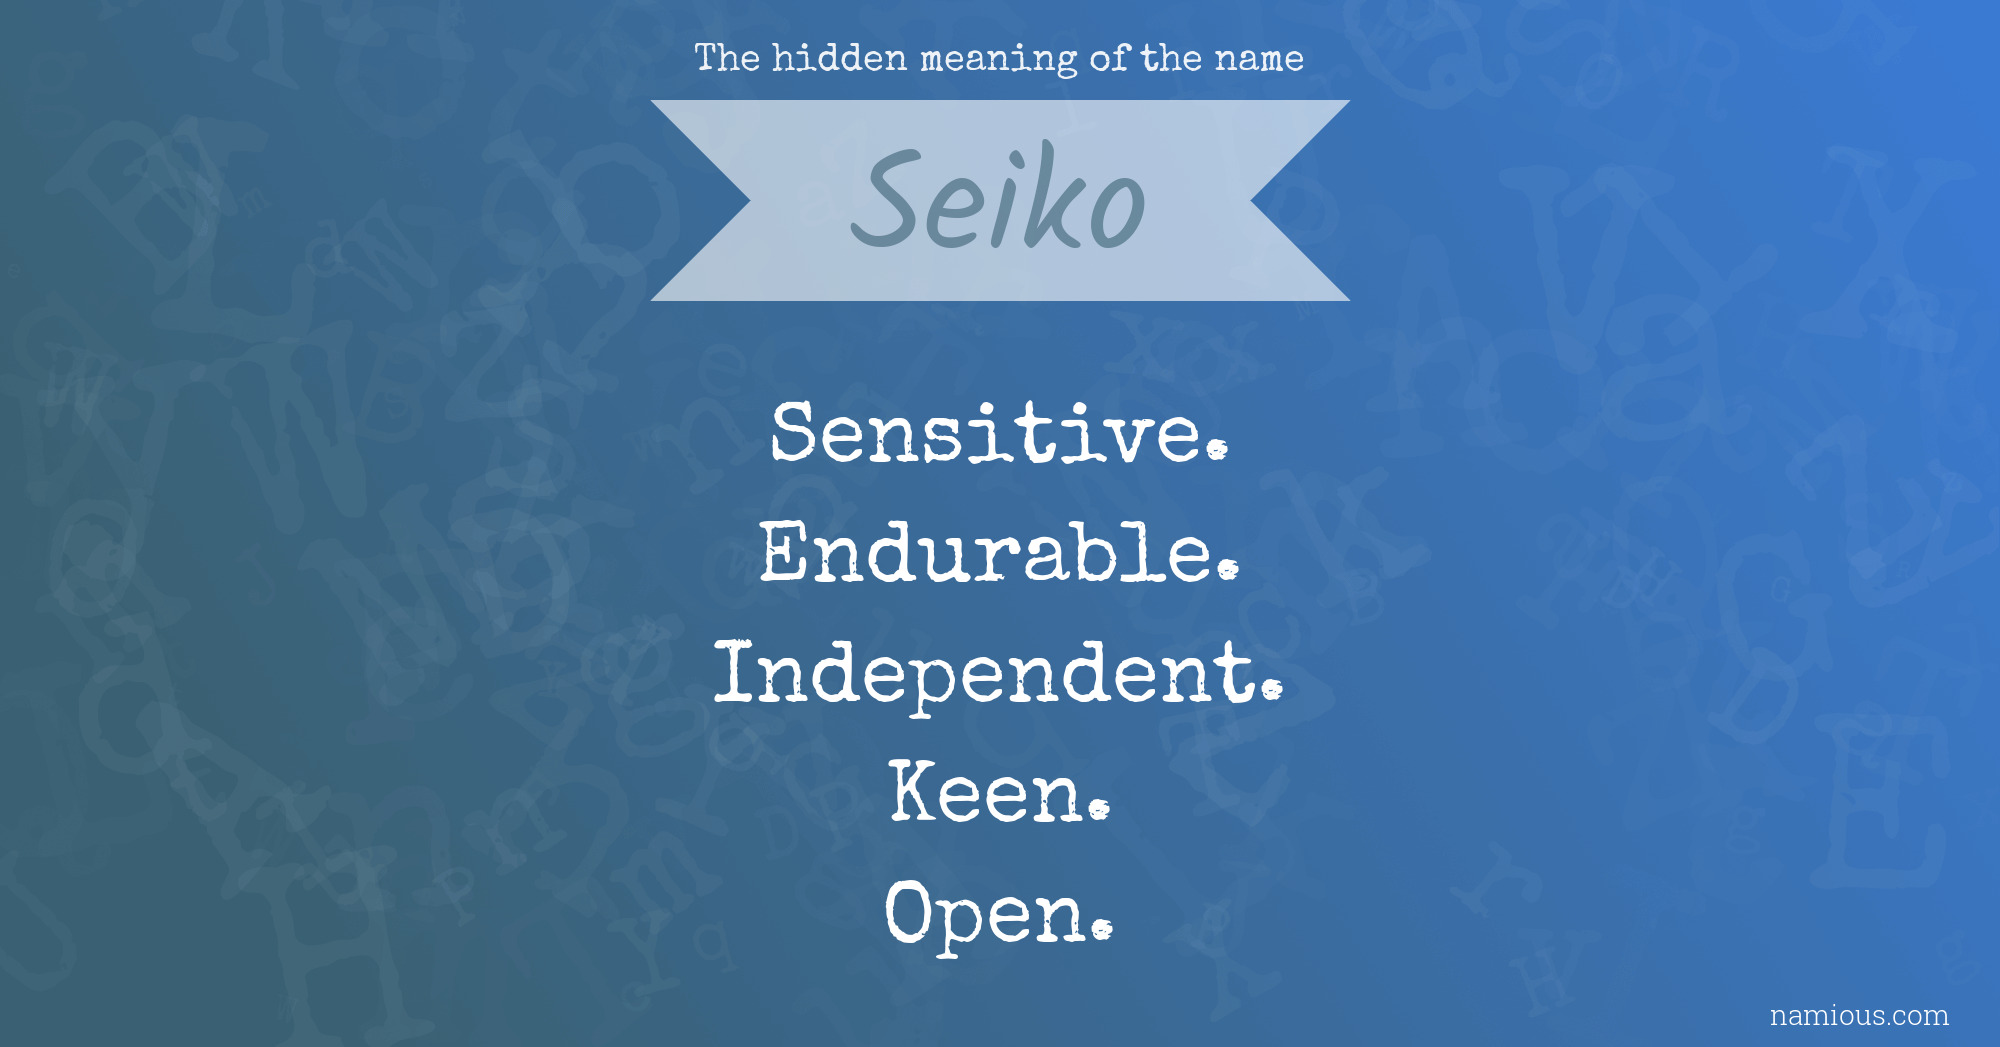 The meaning of the name Seiko | Namious